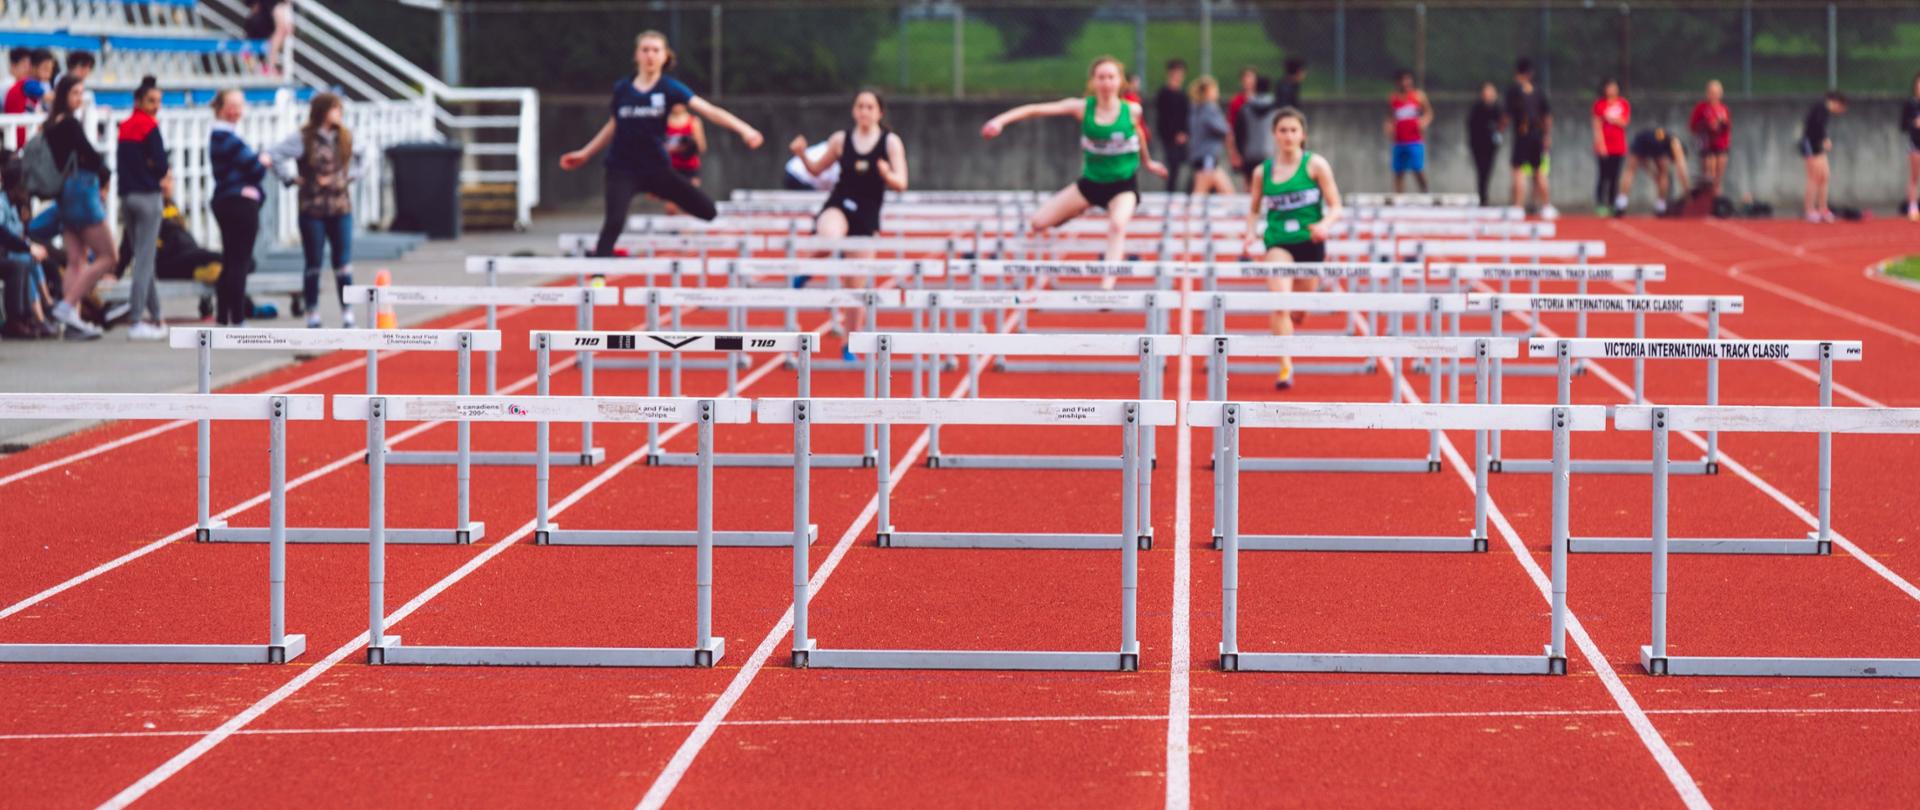 view of people running over hurdles on a treadmill
